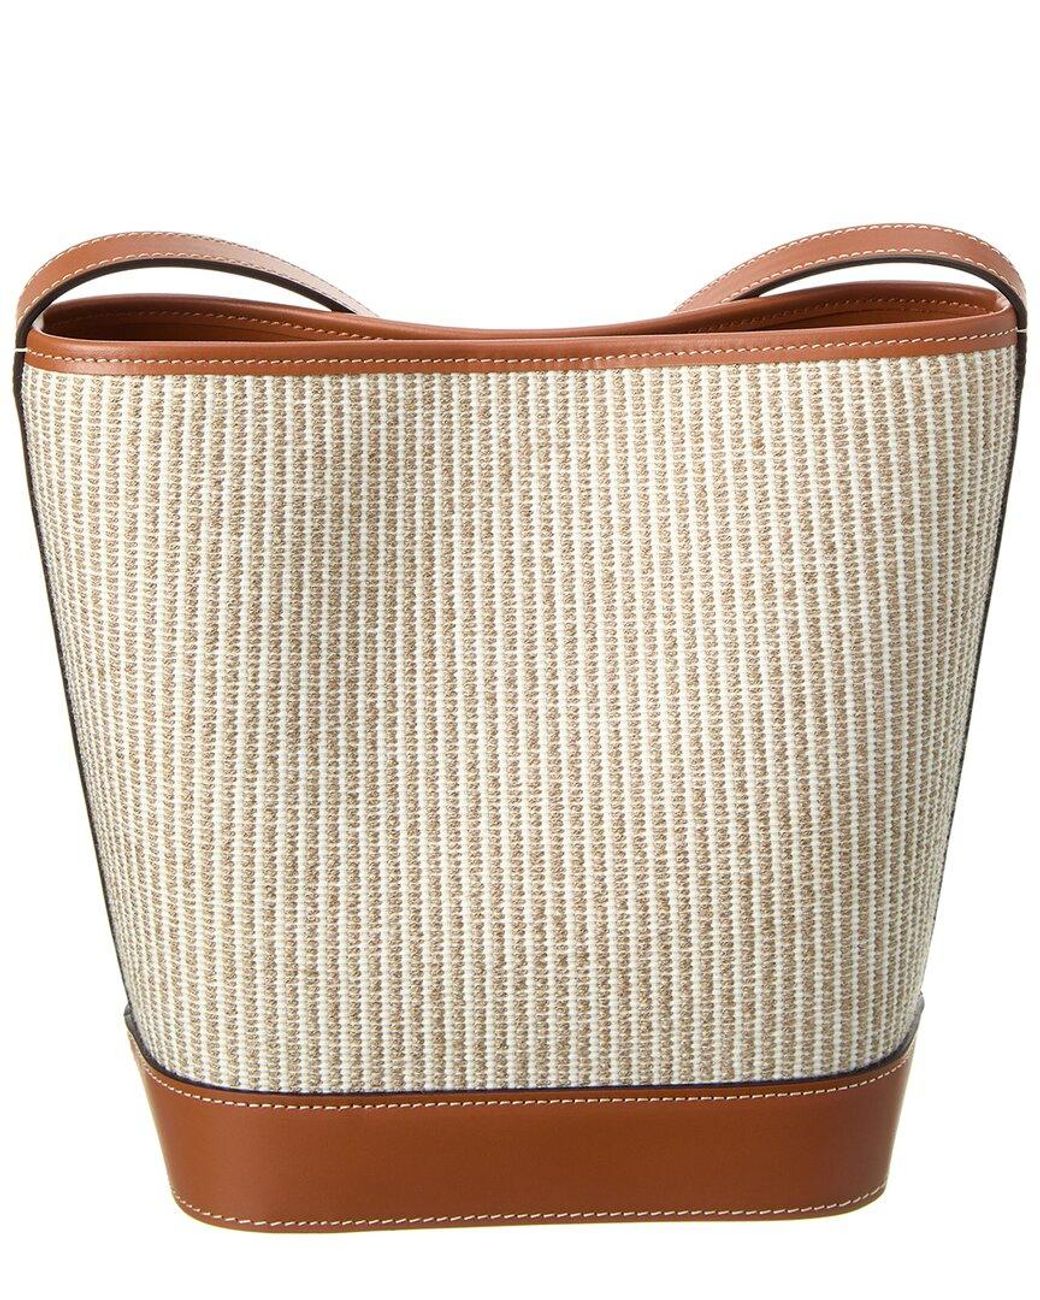 SMALL BUCKET CUIR TRIOMPHE IN STRIPED TEXTILE AND CALFSKIN - BEIGE